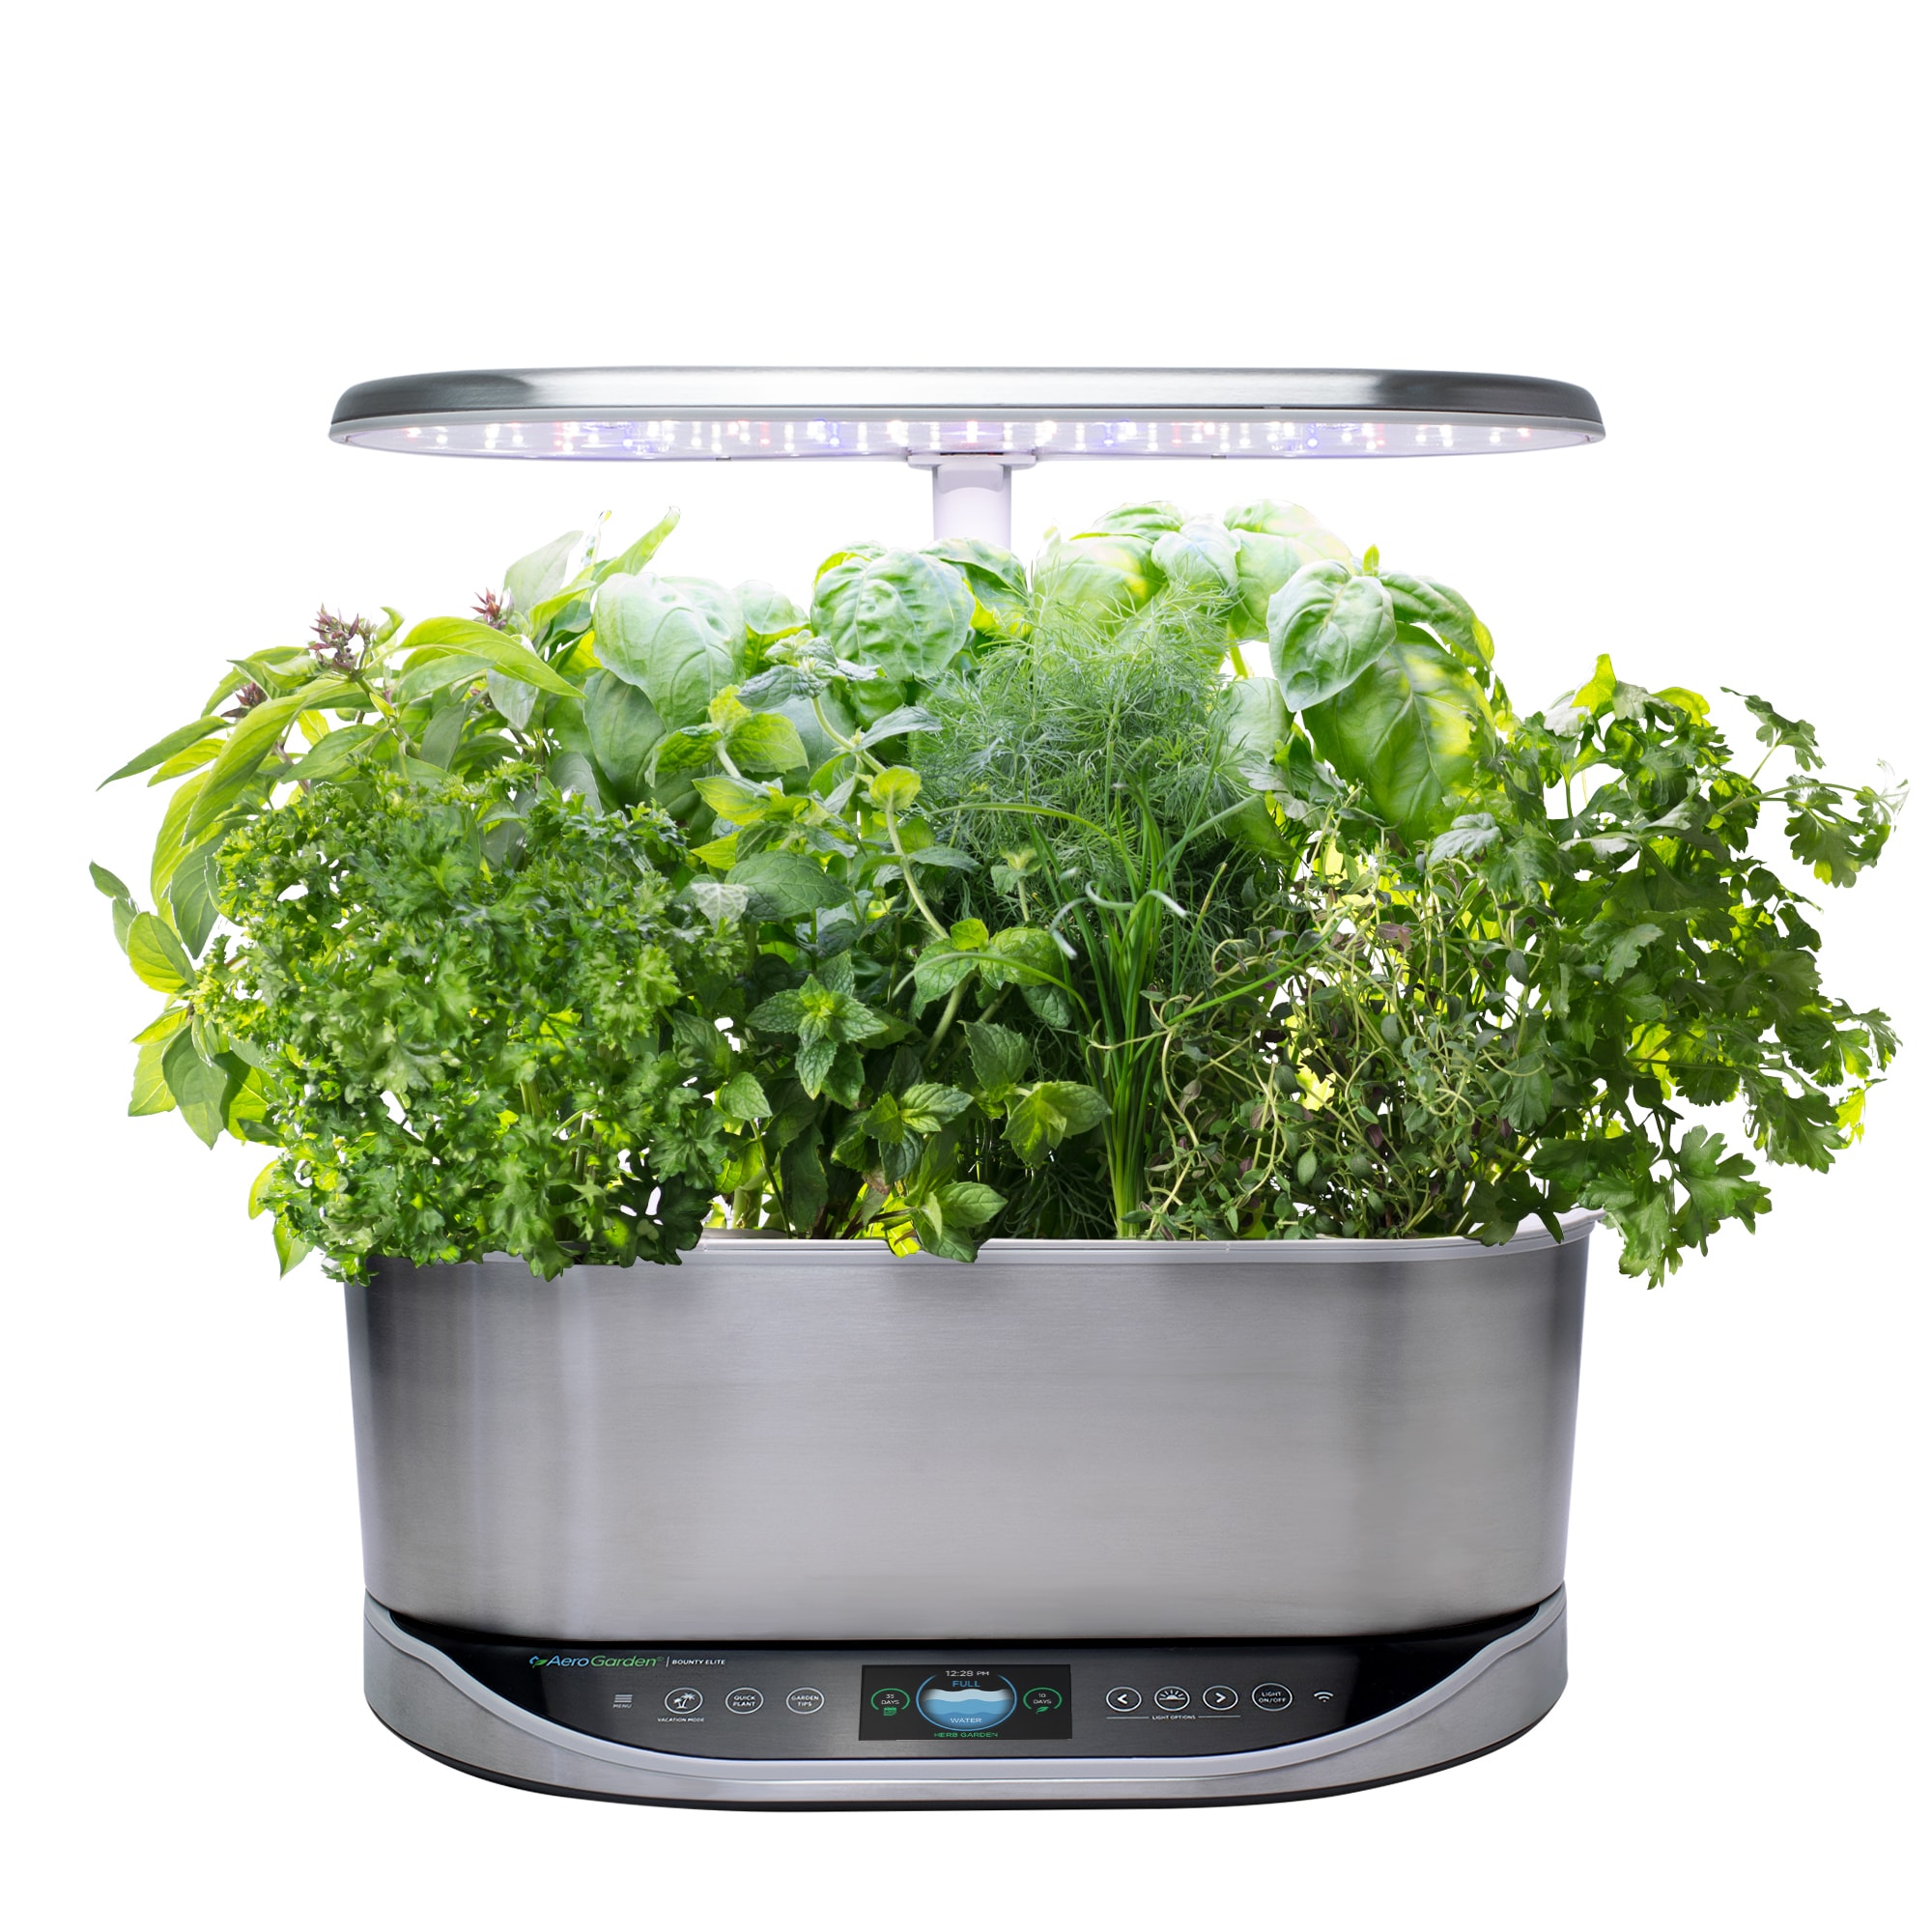 903126-1100 for sale online AeroGarden Bounty Basic with Gourmet Herb Seed Pod Kit 